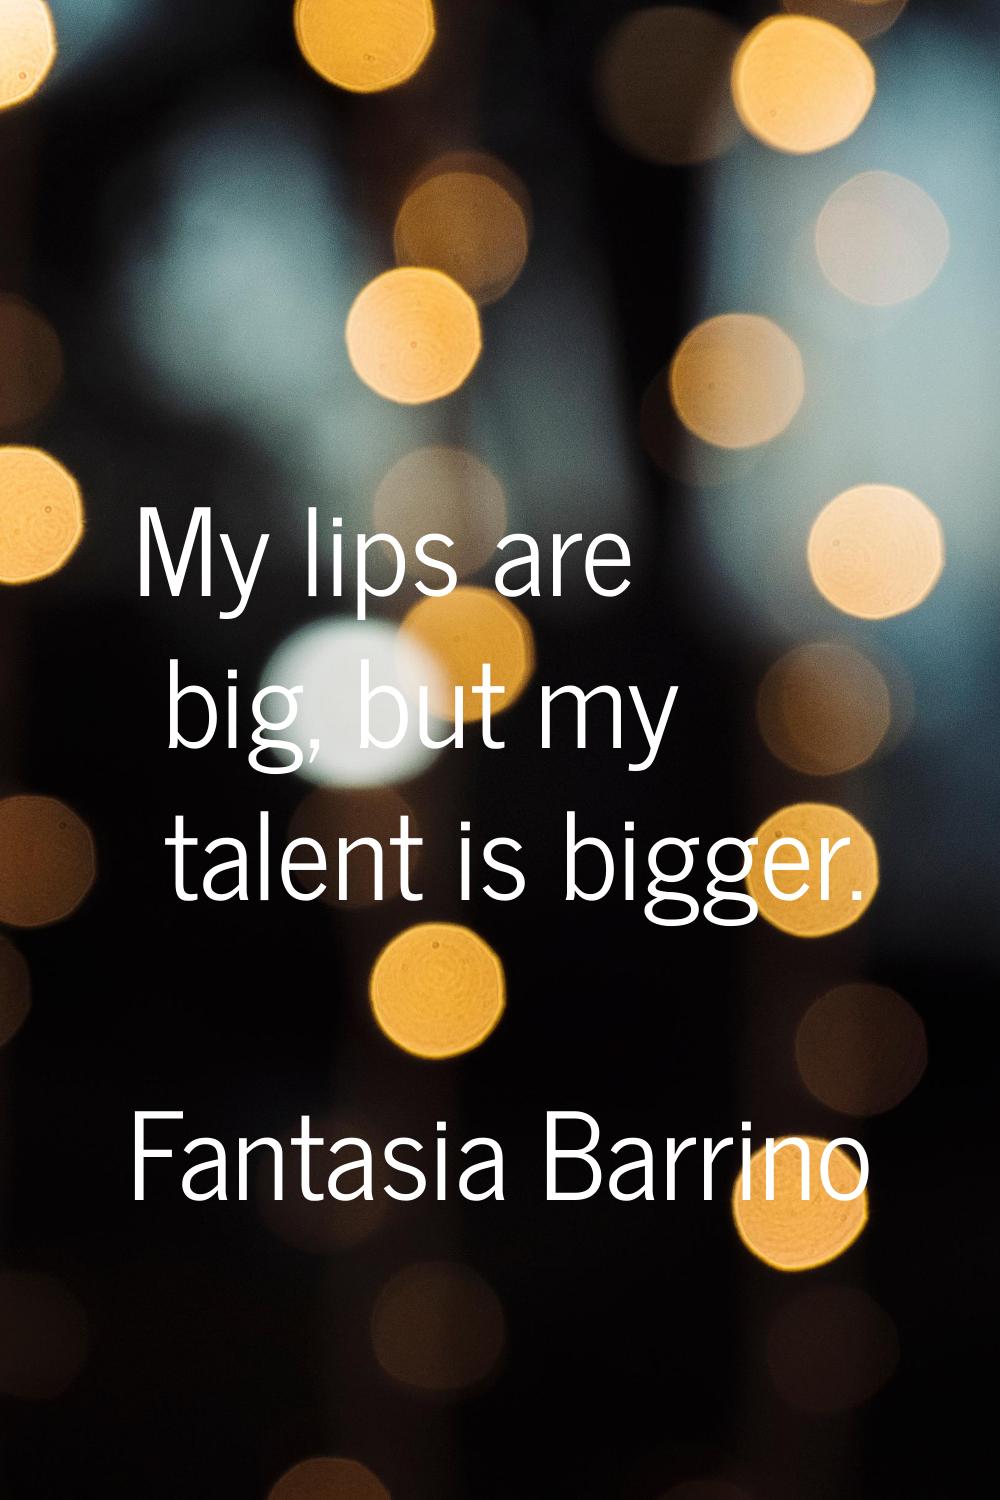 My lips are big, but my talent is bigger.